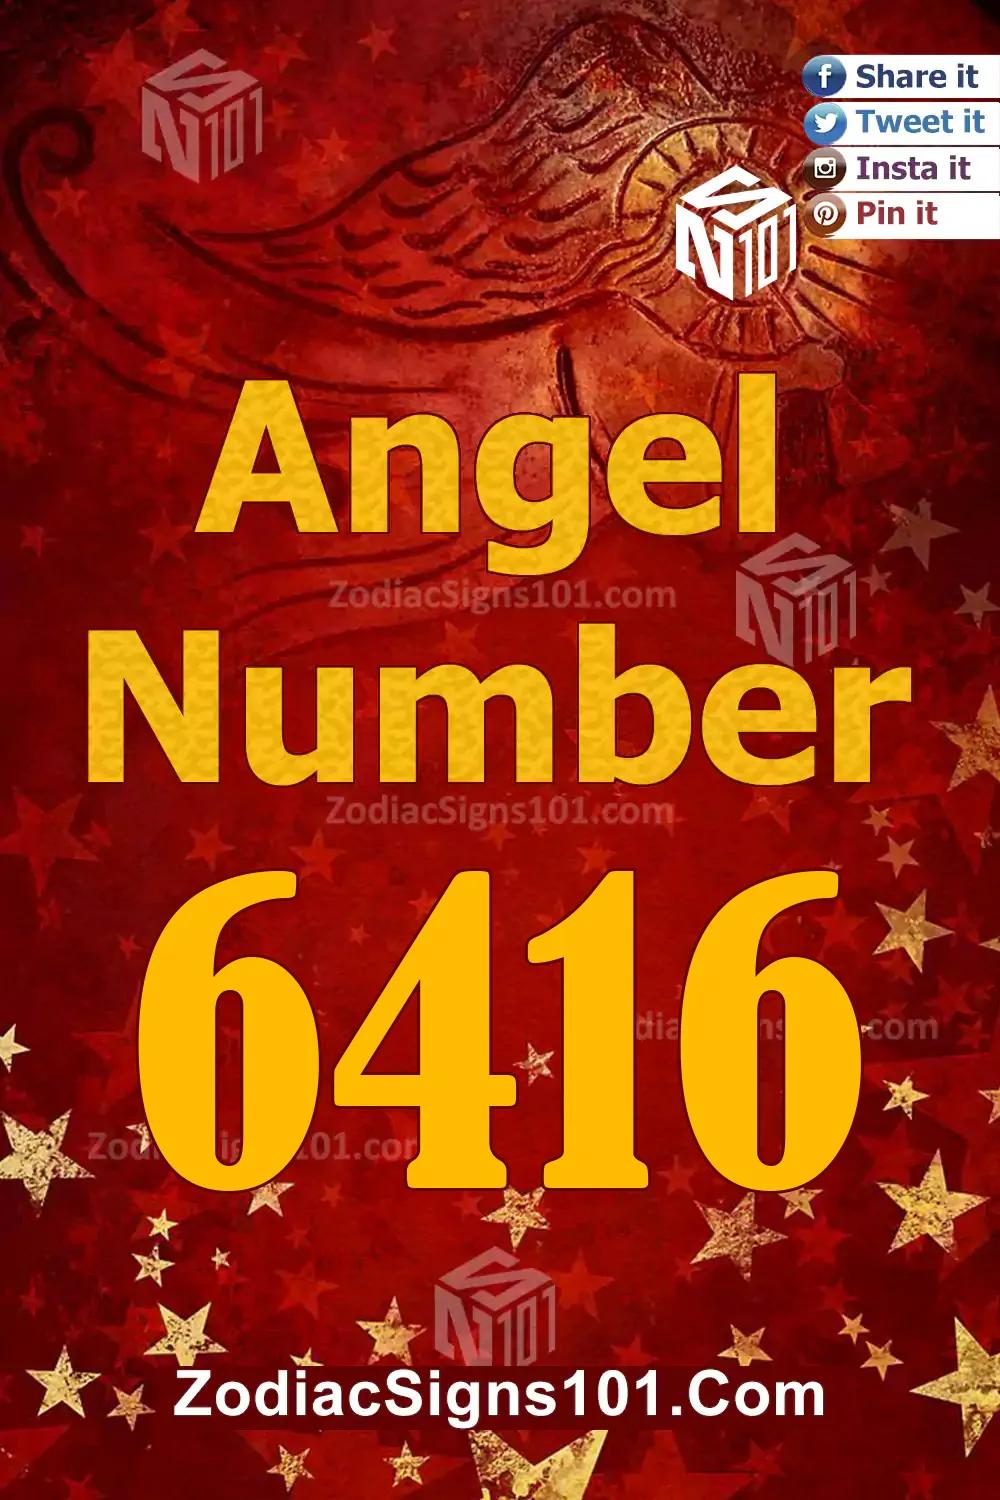 6416 Angel Number Meaning